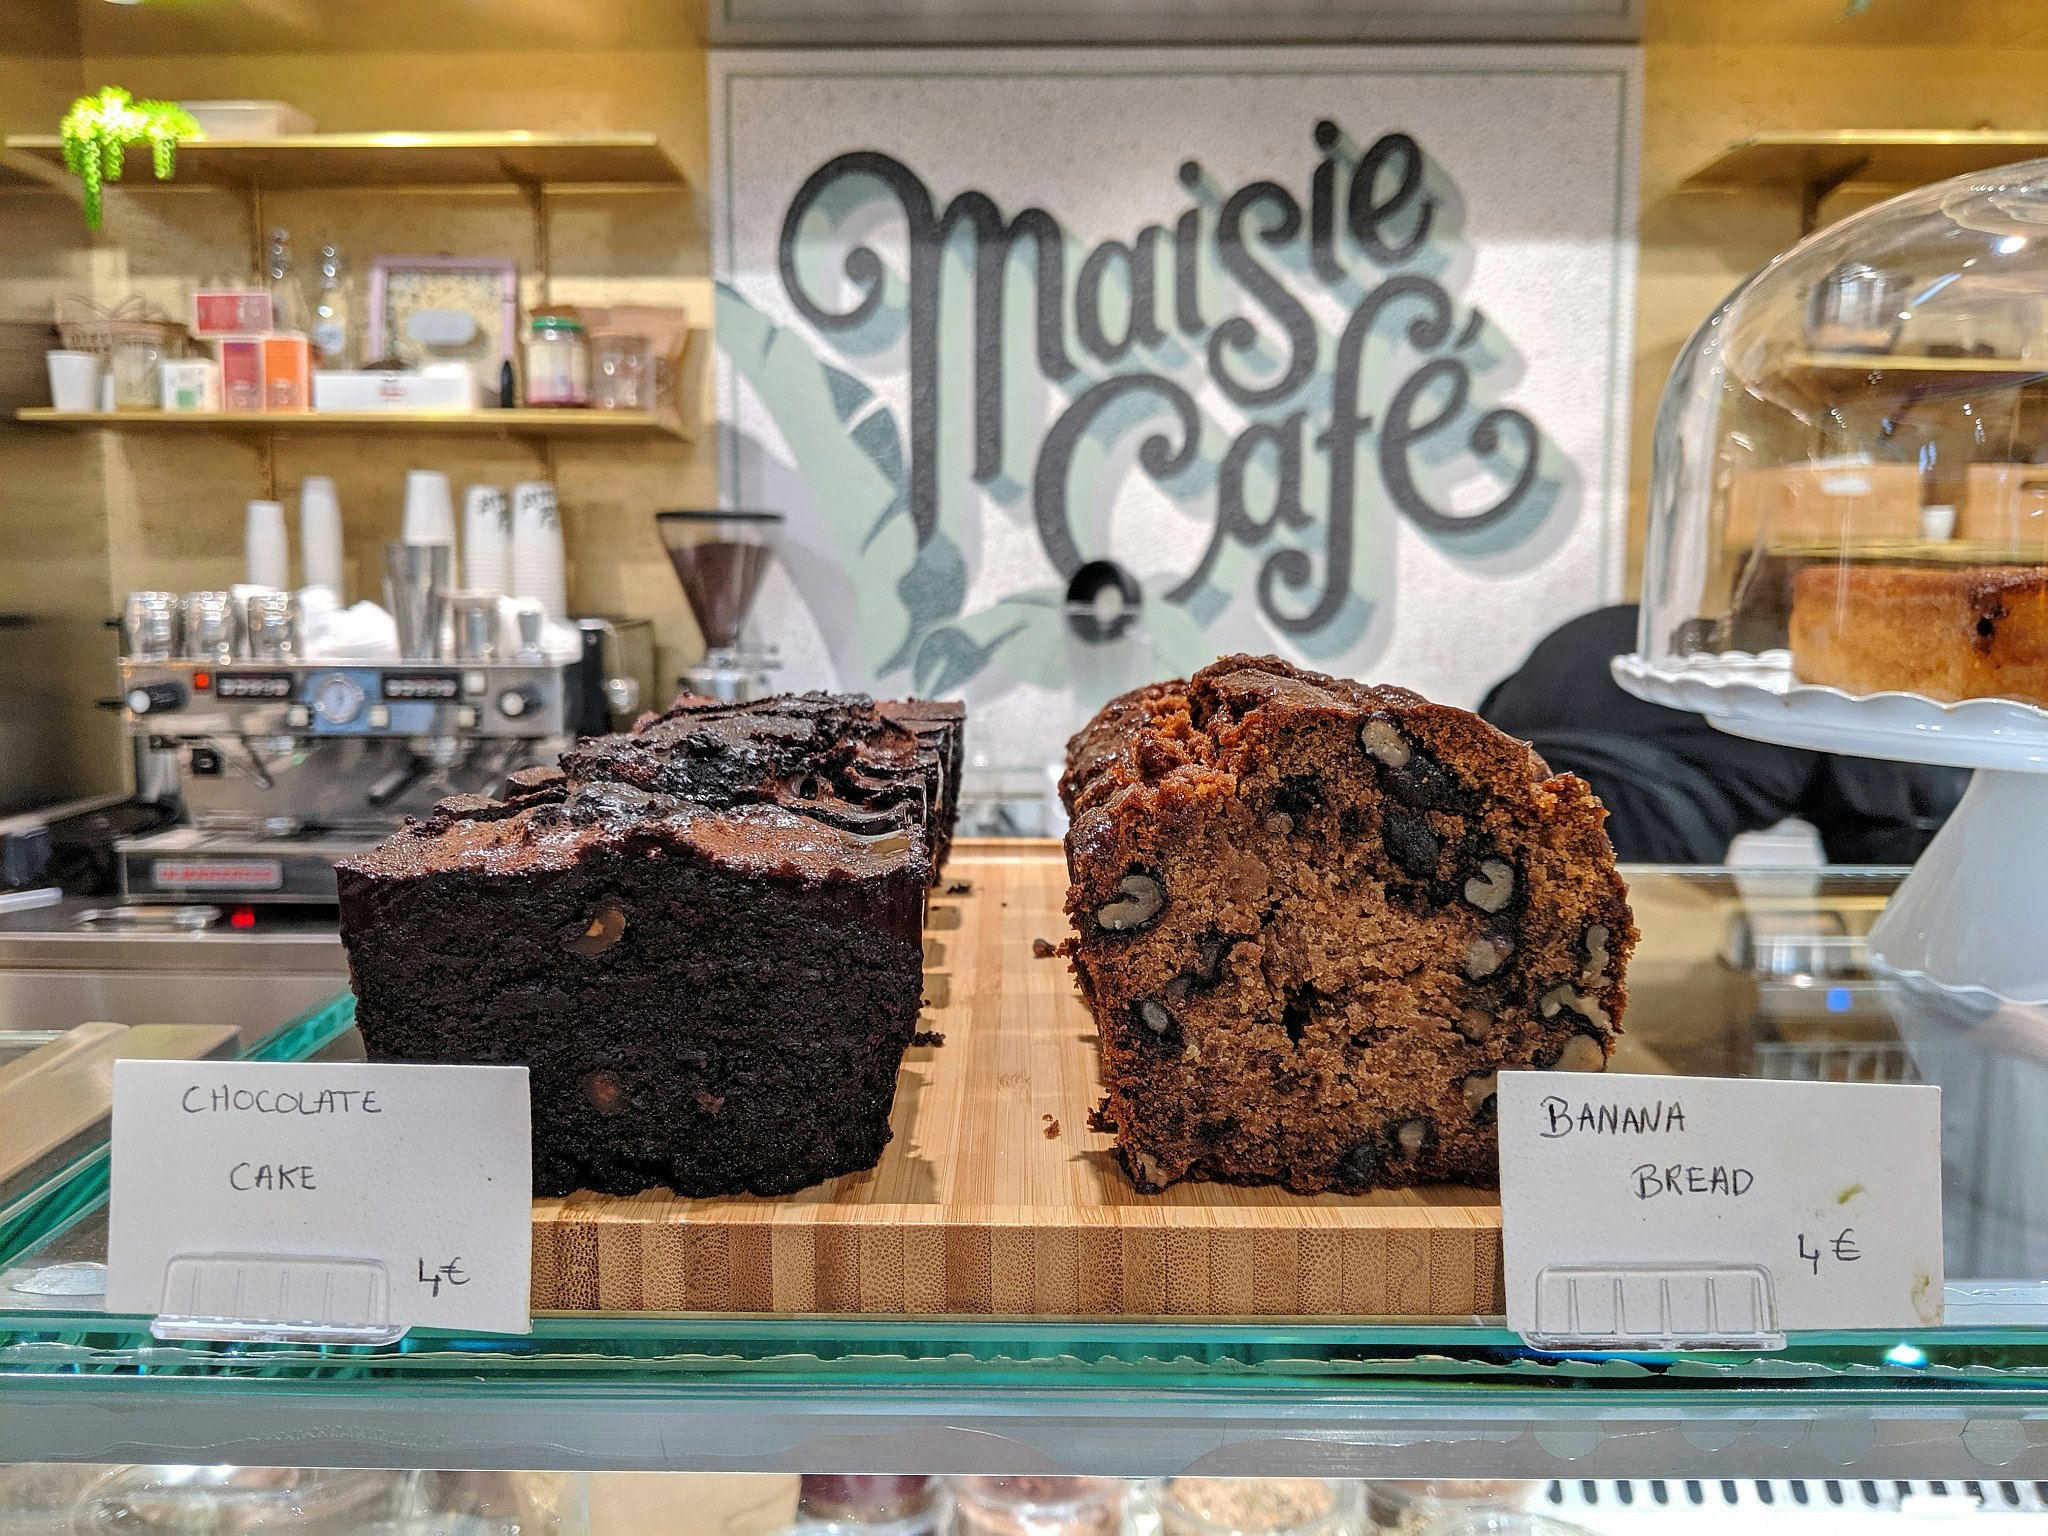 A chocolate cake and a banana cake on a wooden chopping board on a glass shop counter.